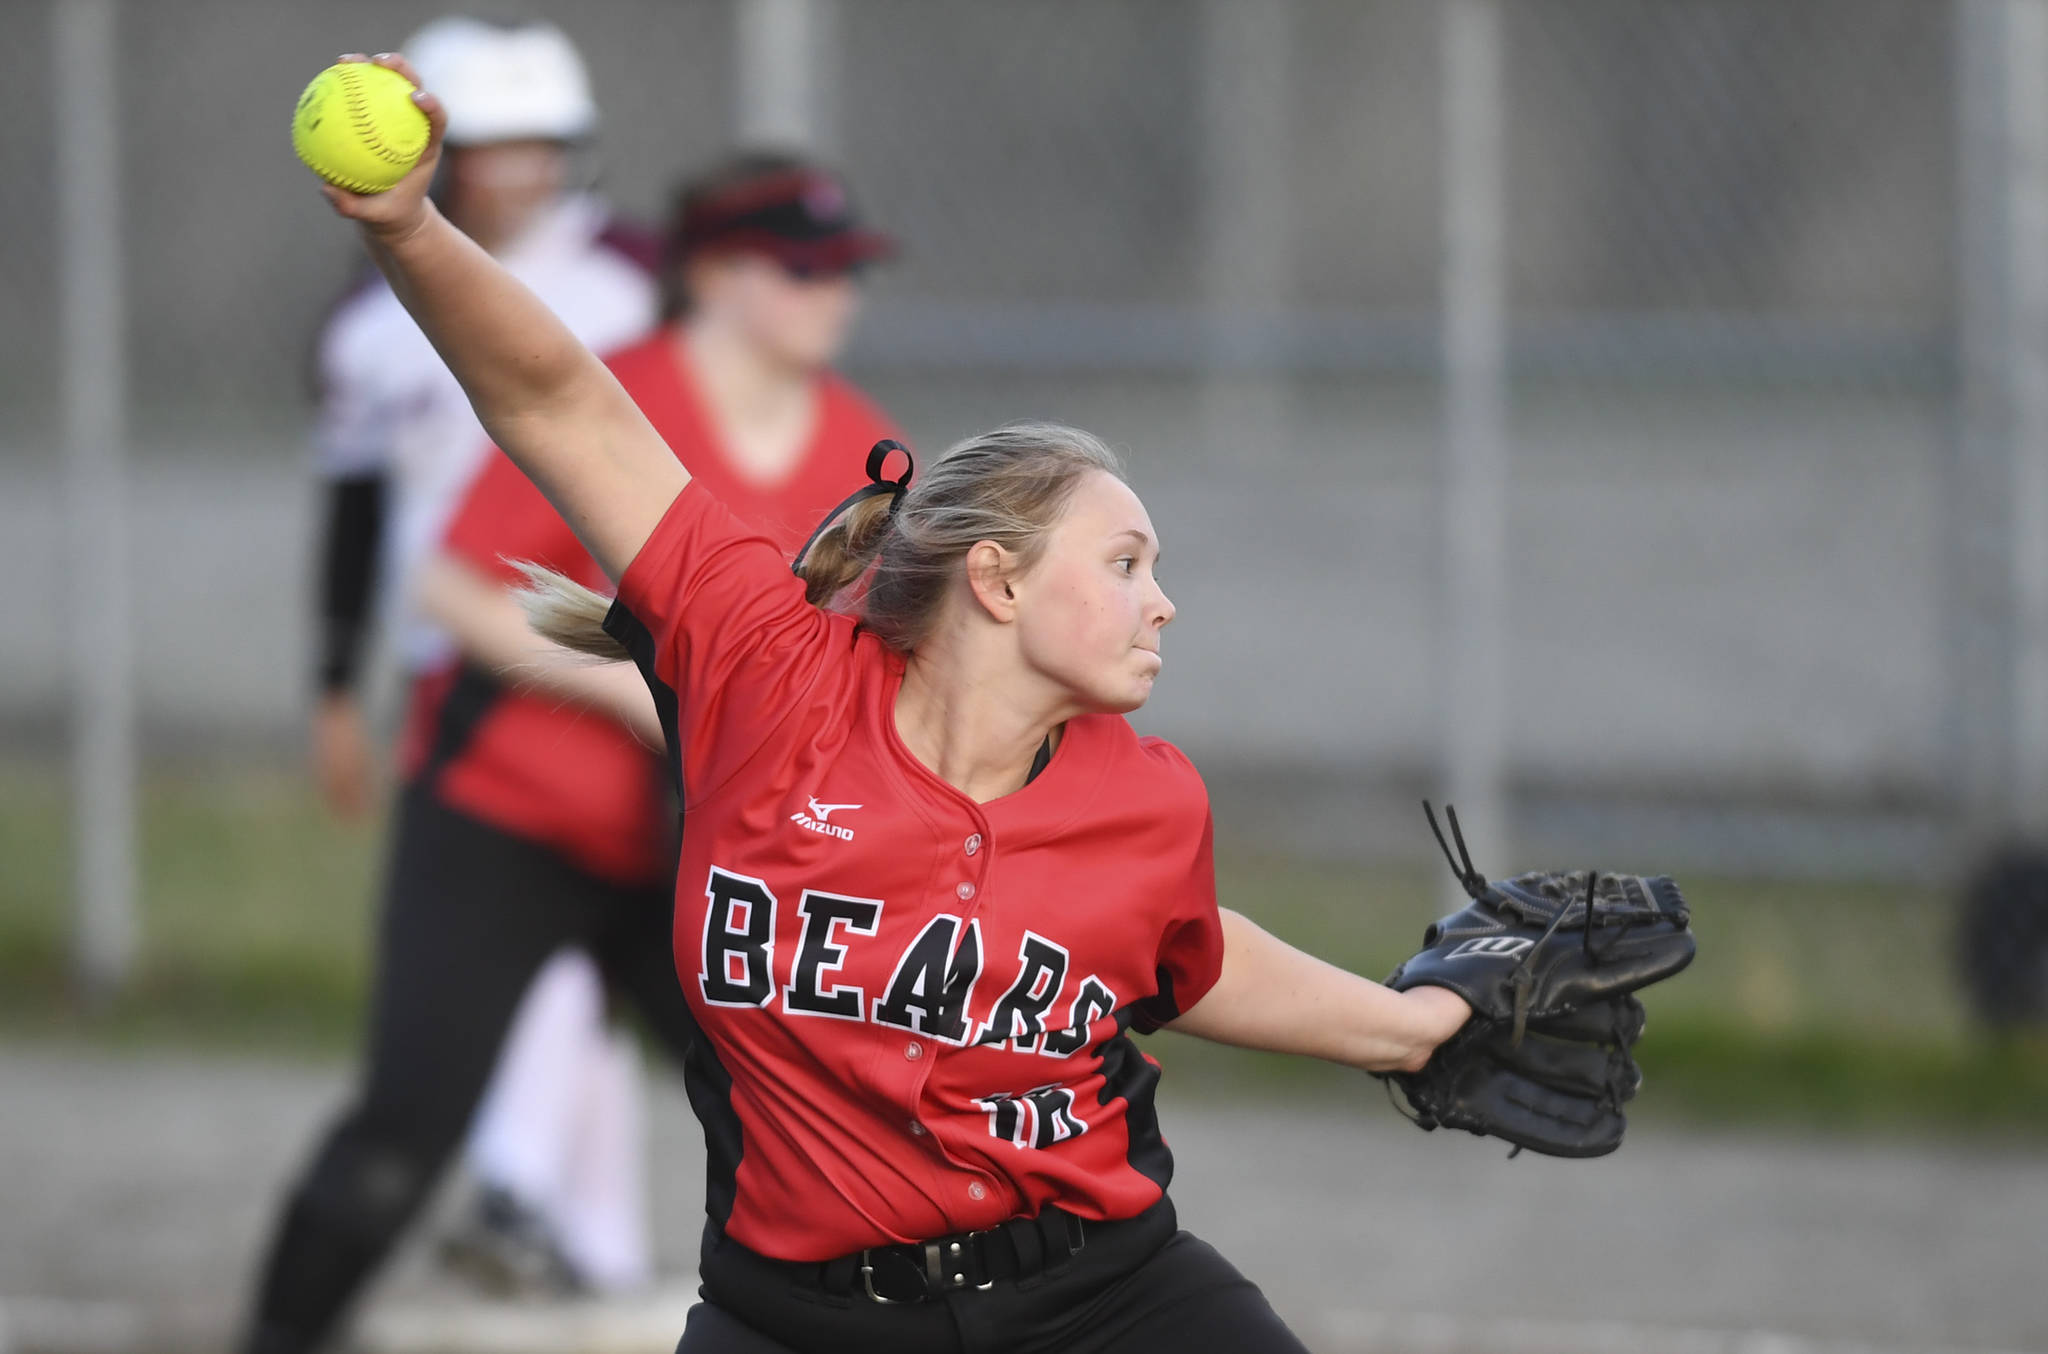 Juneau-Douglas’ Sophia Schauwecker pitches against Ketchikan in the four inning at Melvin Park on Thursday, May 9, 2019. Ketchikan won 13-0. (Michael Penn | Juneau Empire File)